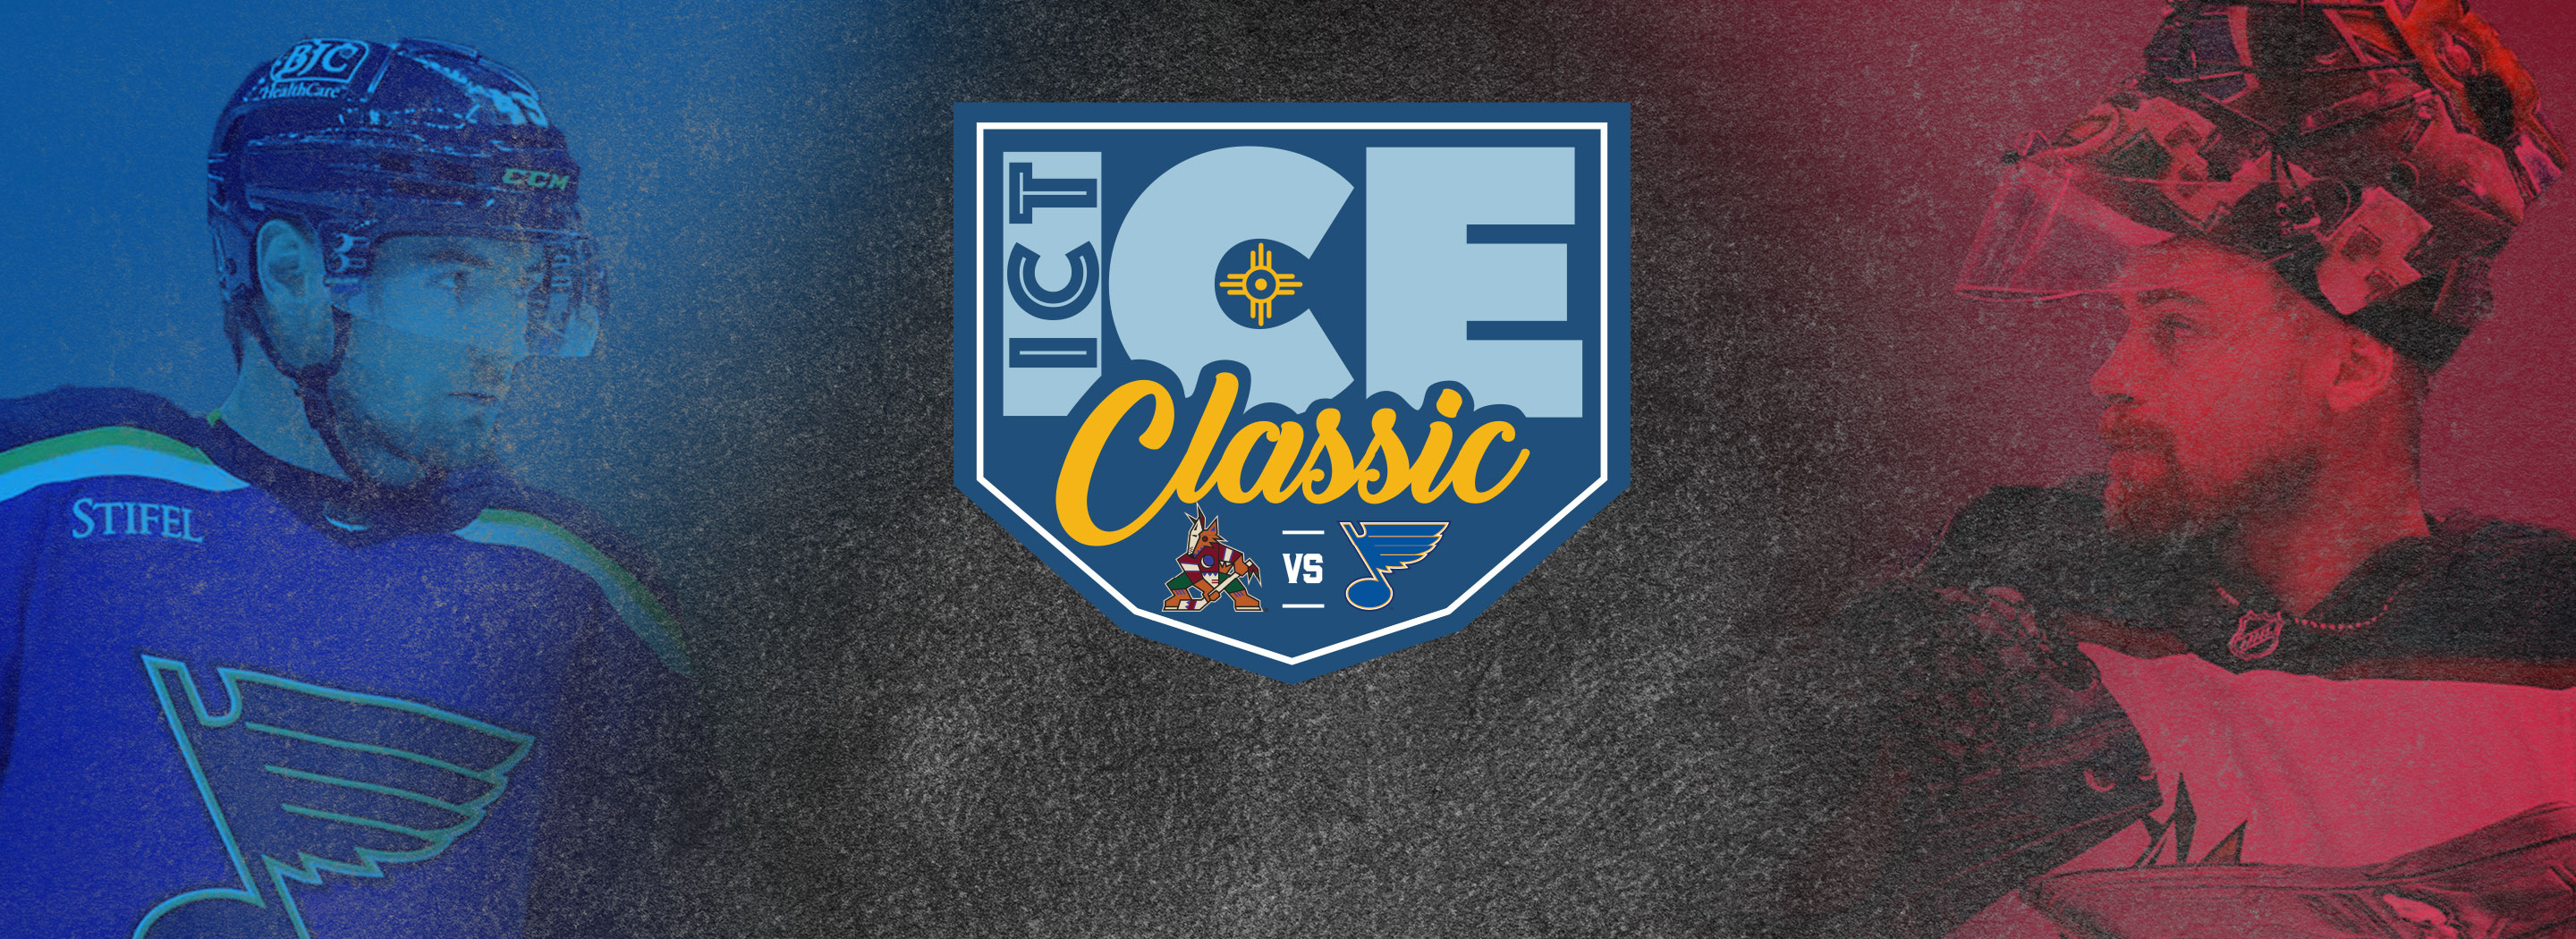 ICT Ice Classic: Coyotes vs Blues at INTRUST Bank Arena - SEP 23